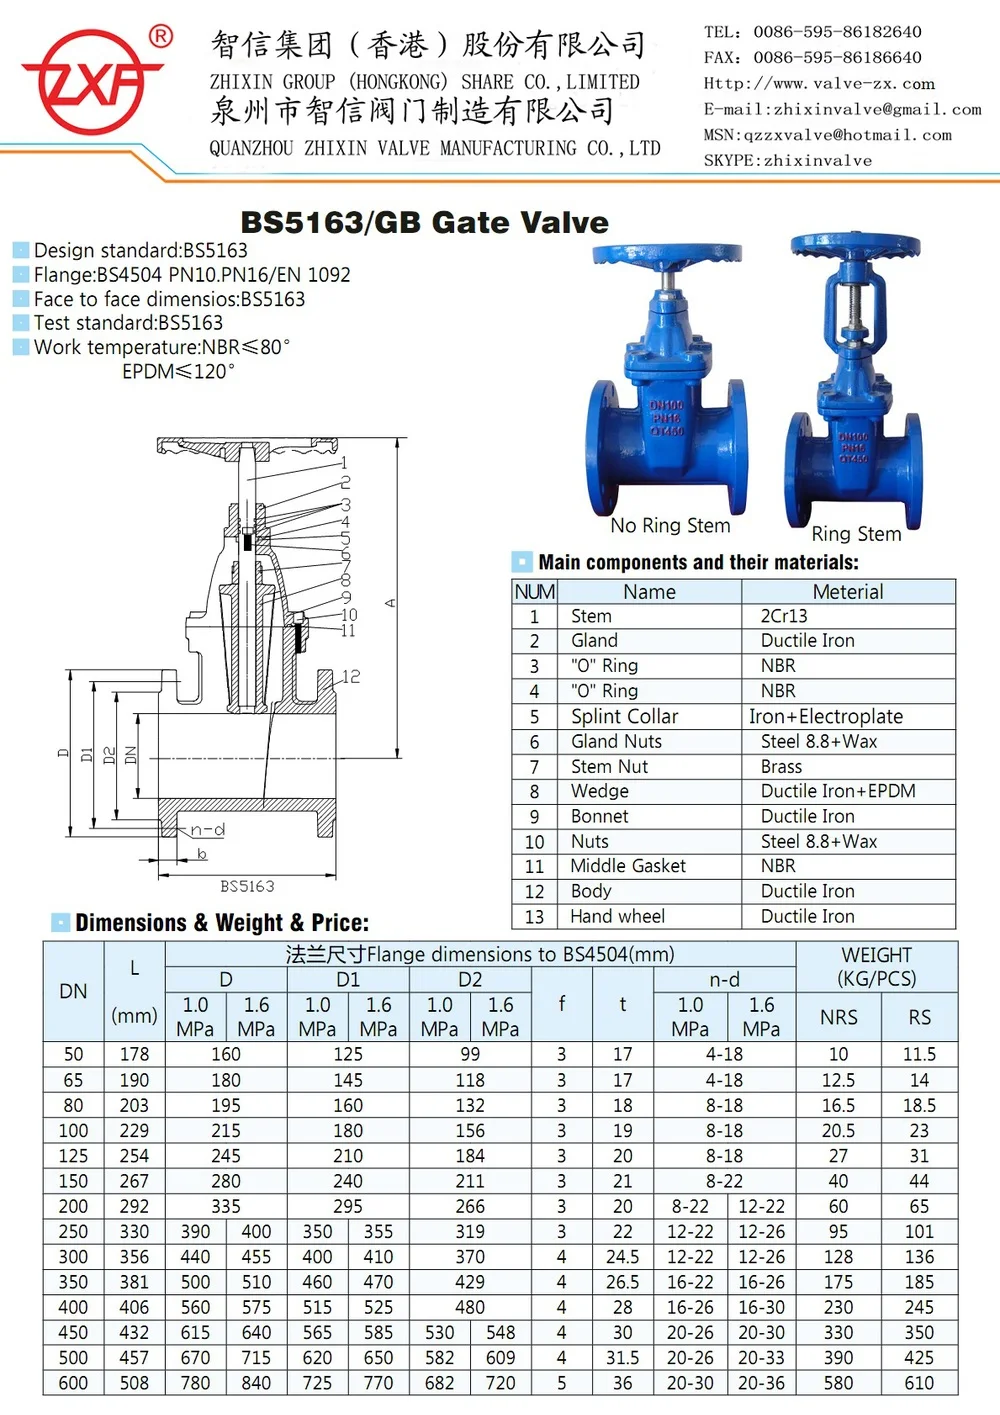 Ductile Iron Bs5163 Resilient Seated Gate Valve Light Type Dn50-dn300